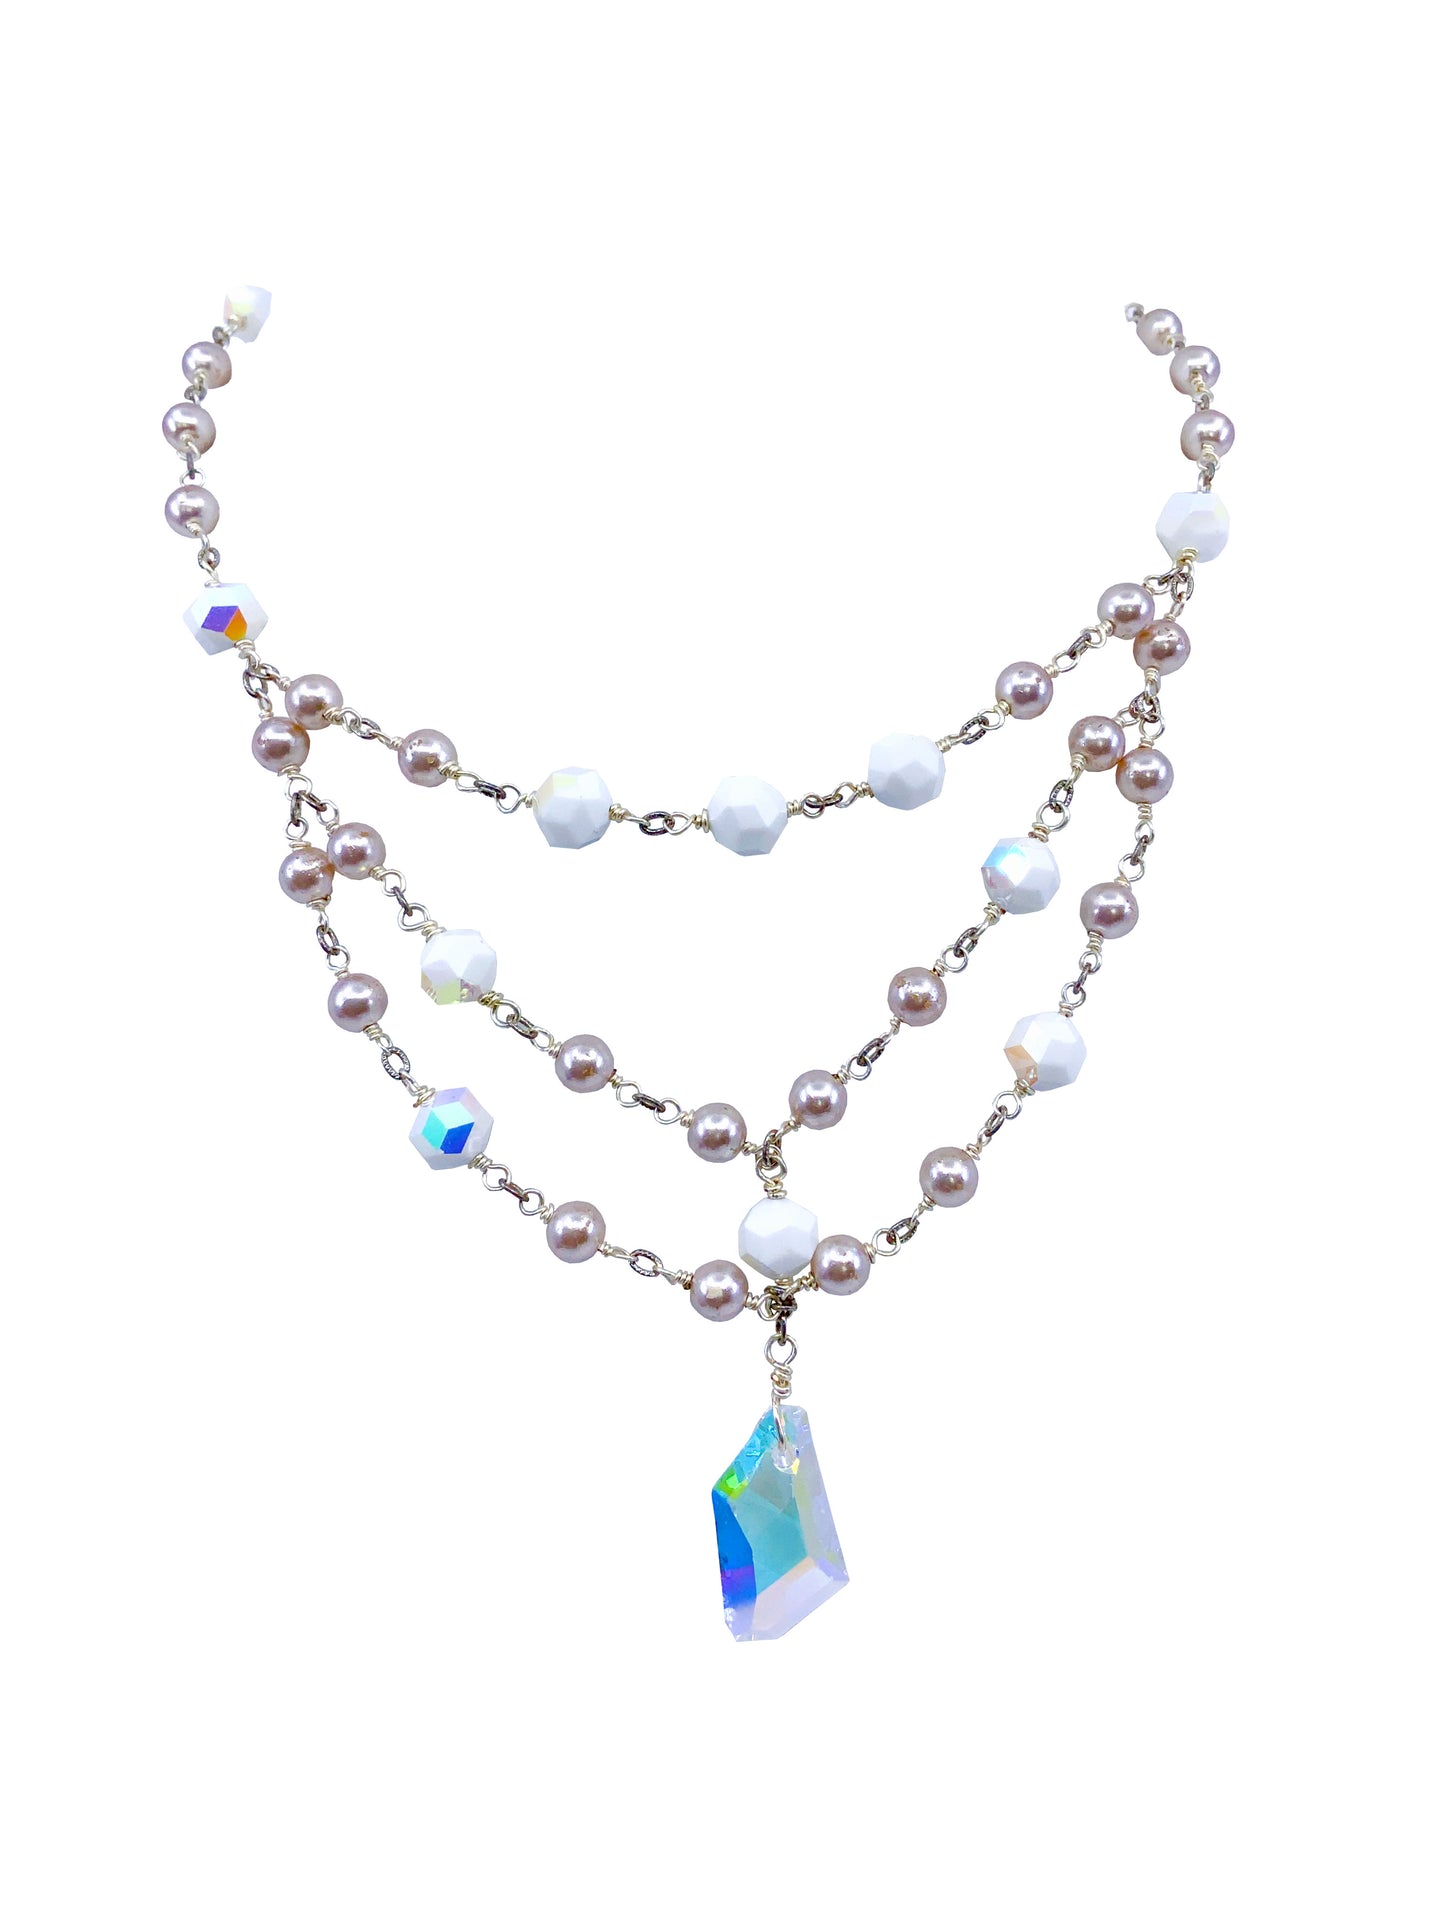 Timeless Glamour Necklace